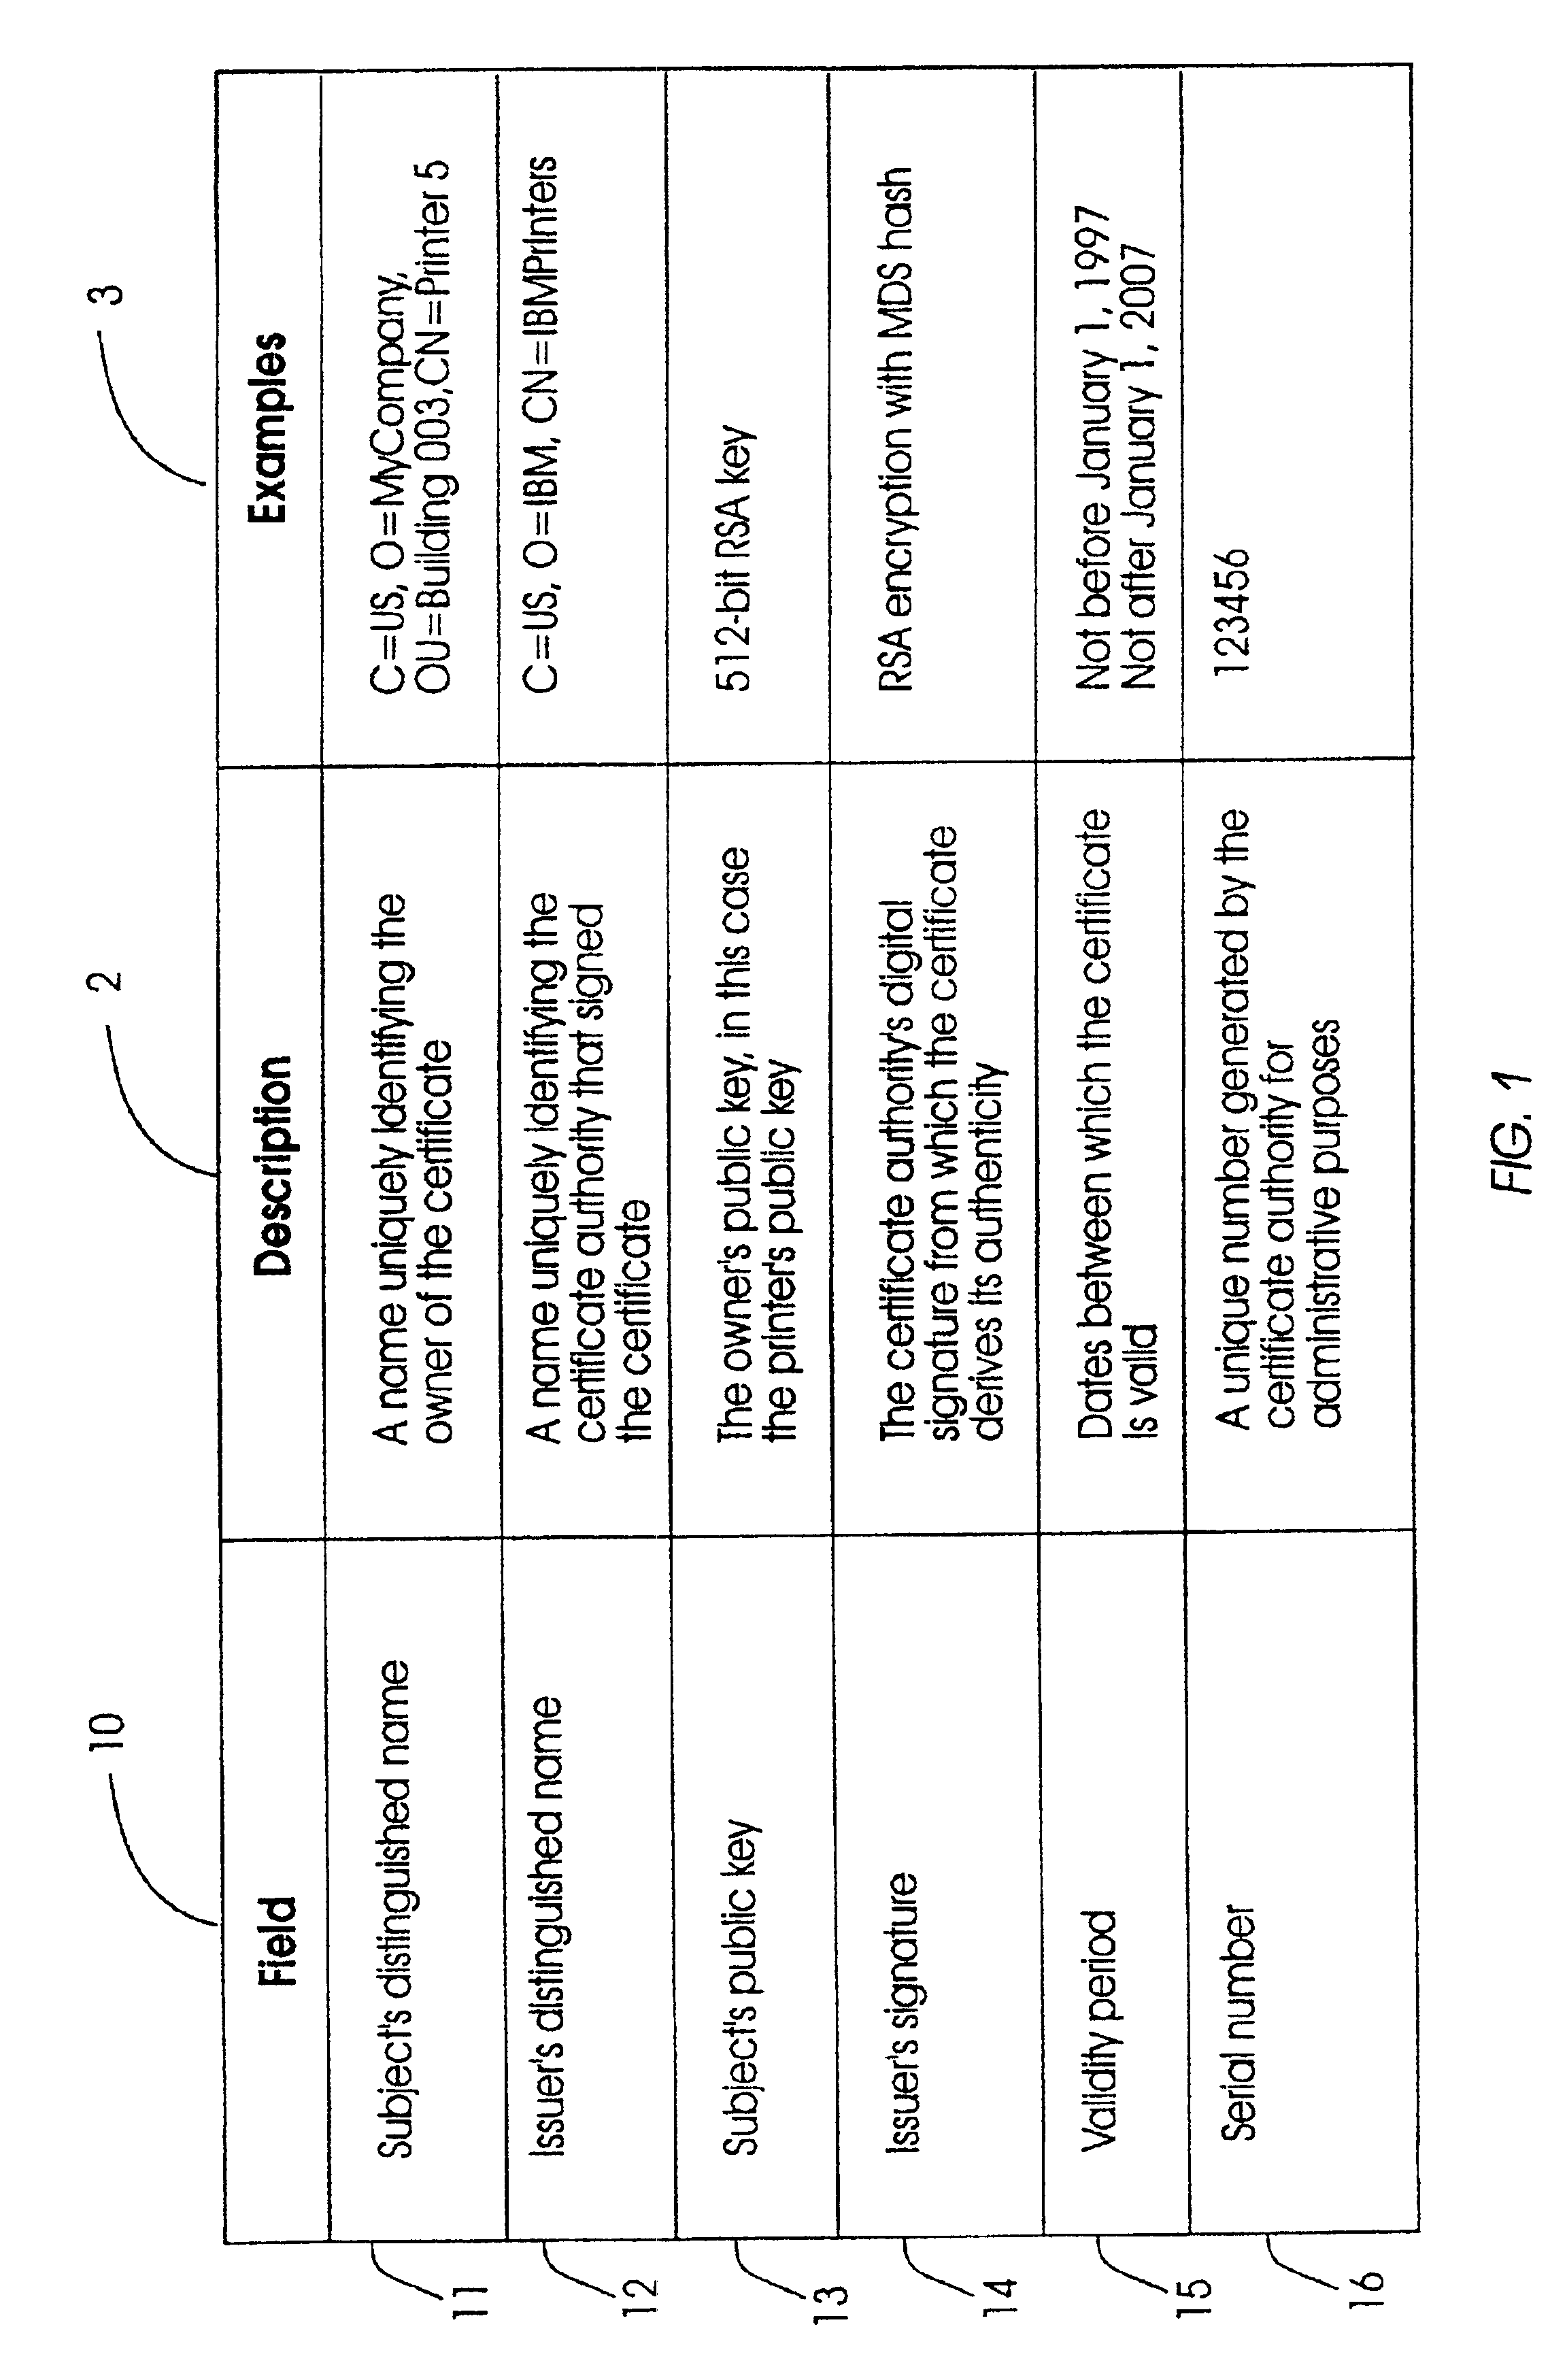 Secure configuration of a digital certificate for a printer or other network device